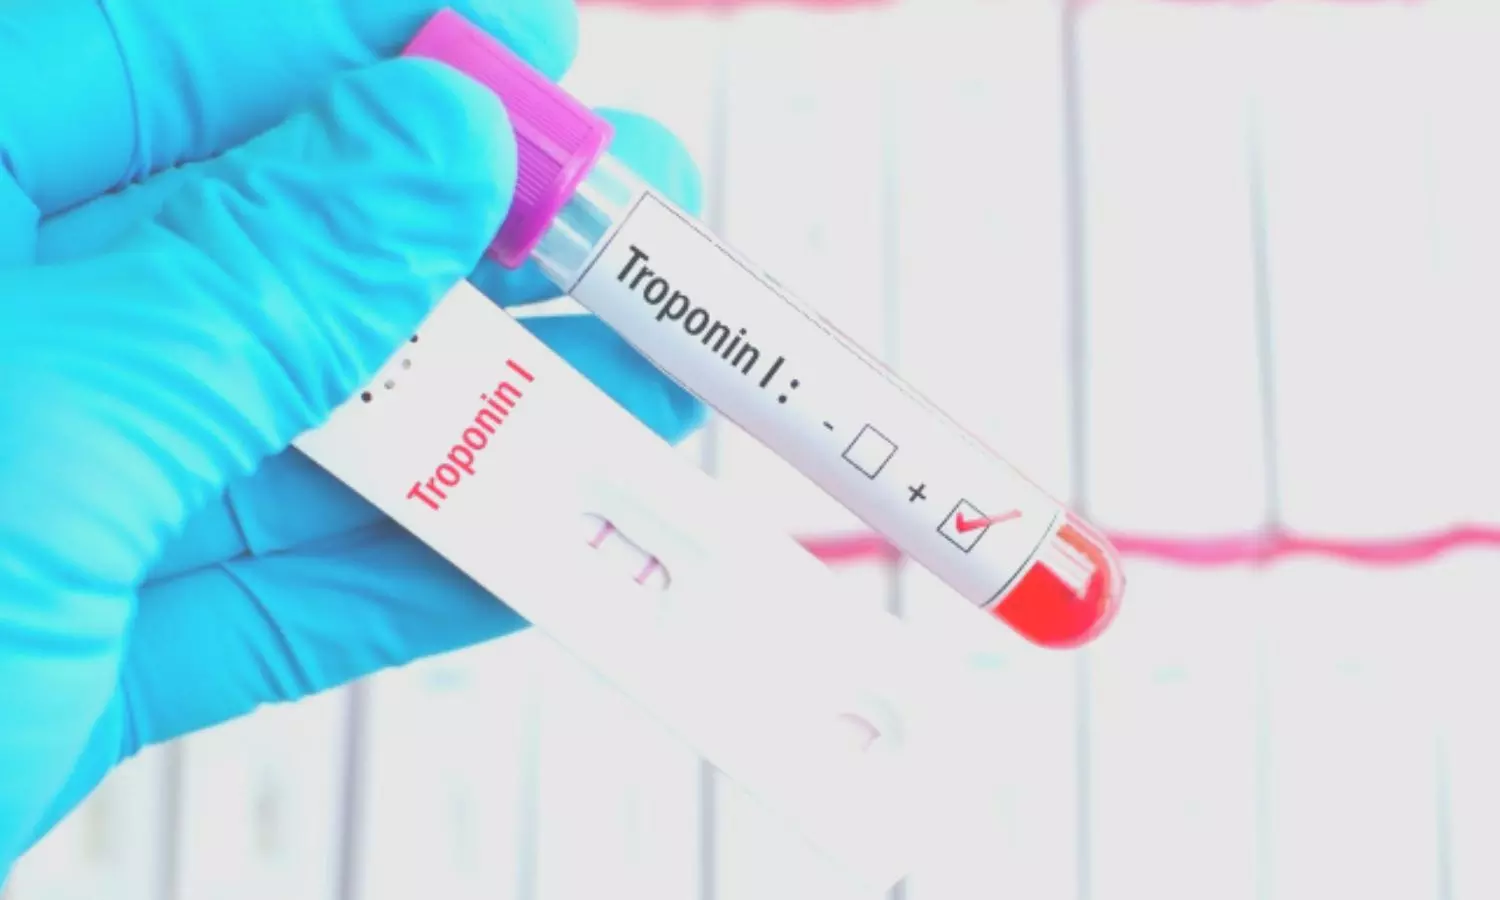 Serial hs Troponin assessment may further refine risk-assessment in patients post ACS: JAMA study